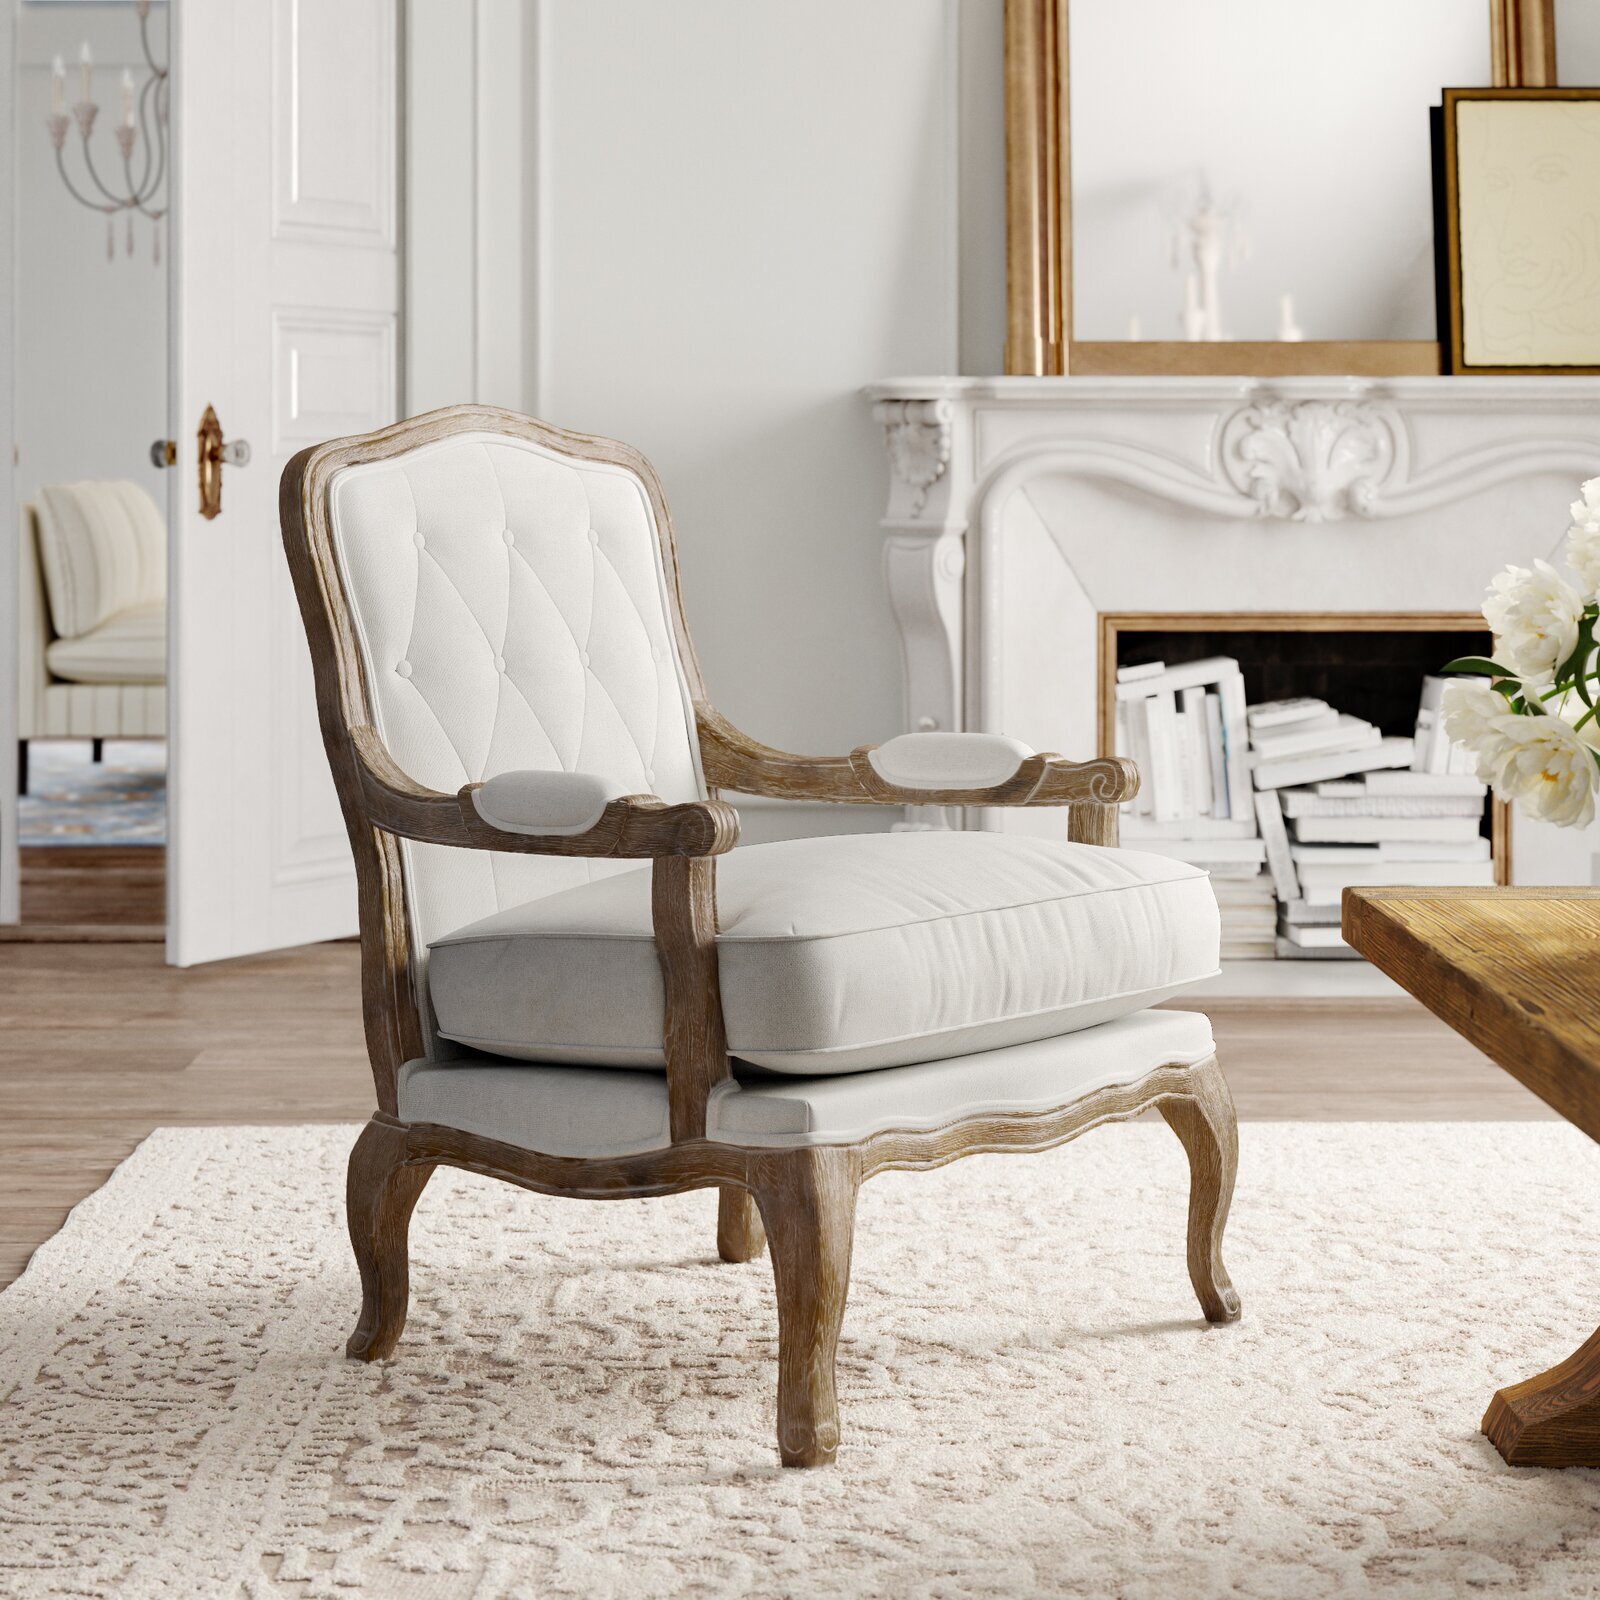 French country armchairs in neutral colors